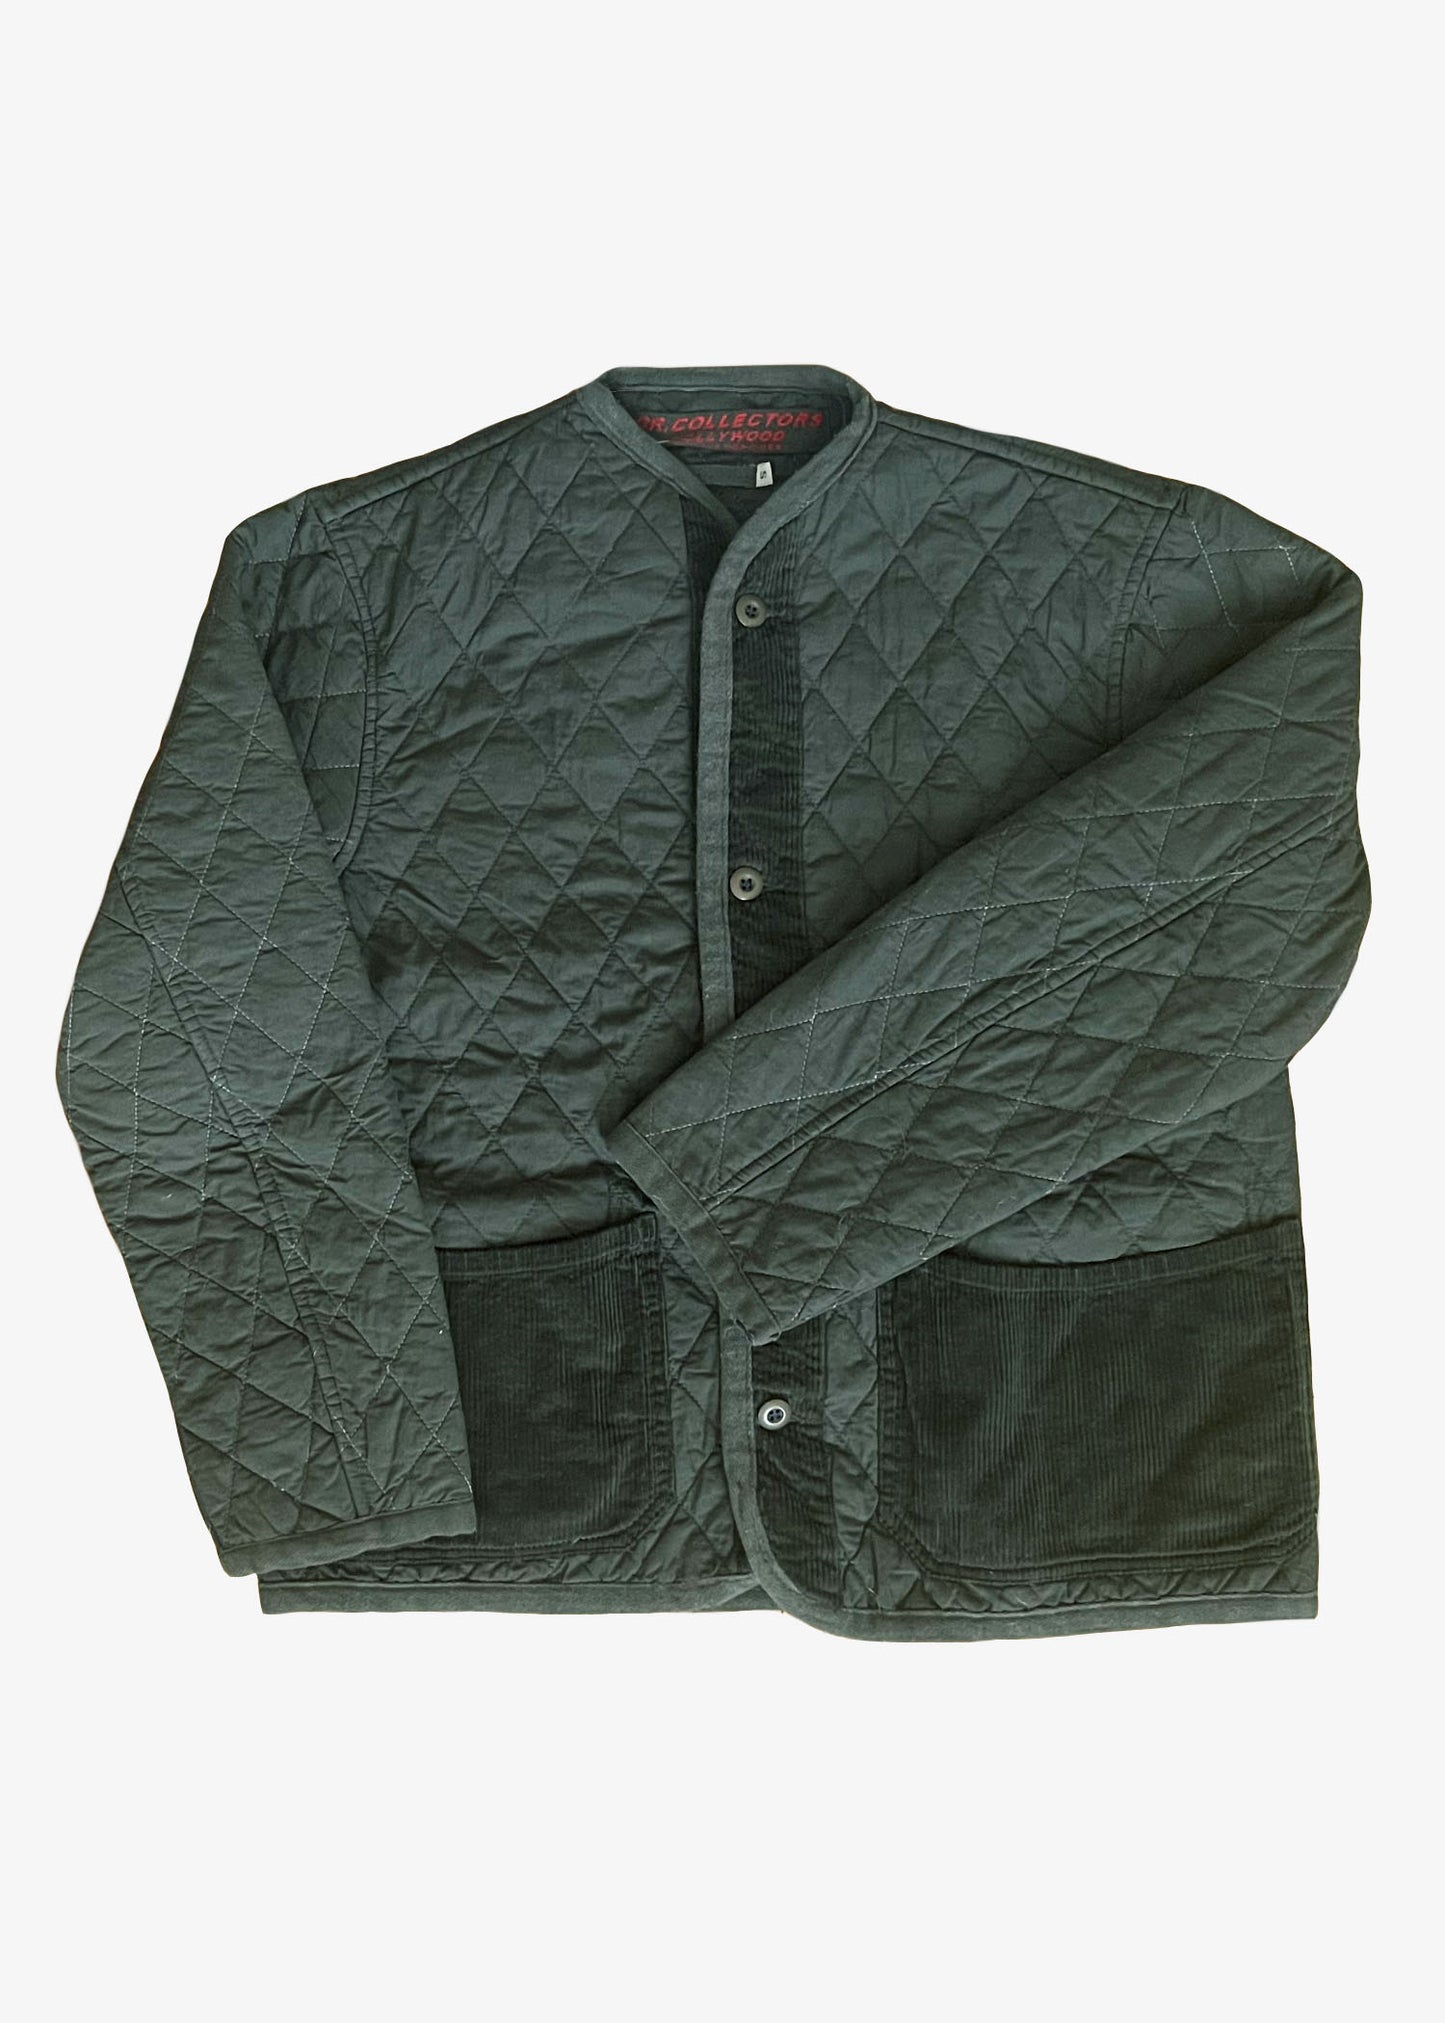 Dr-Collectors-N52-Peace-Quilted-Sulfur-Black